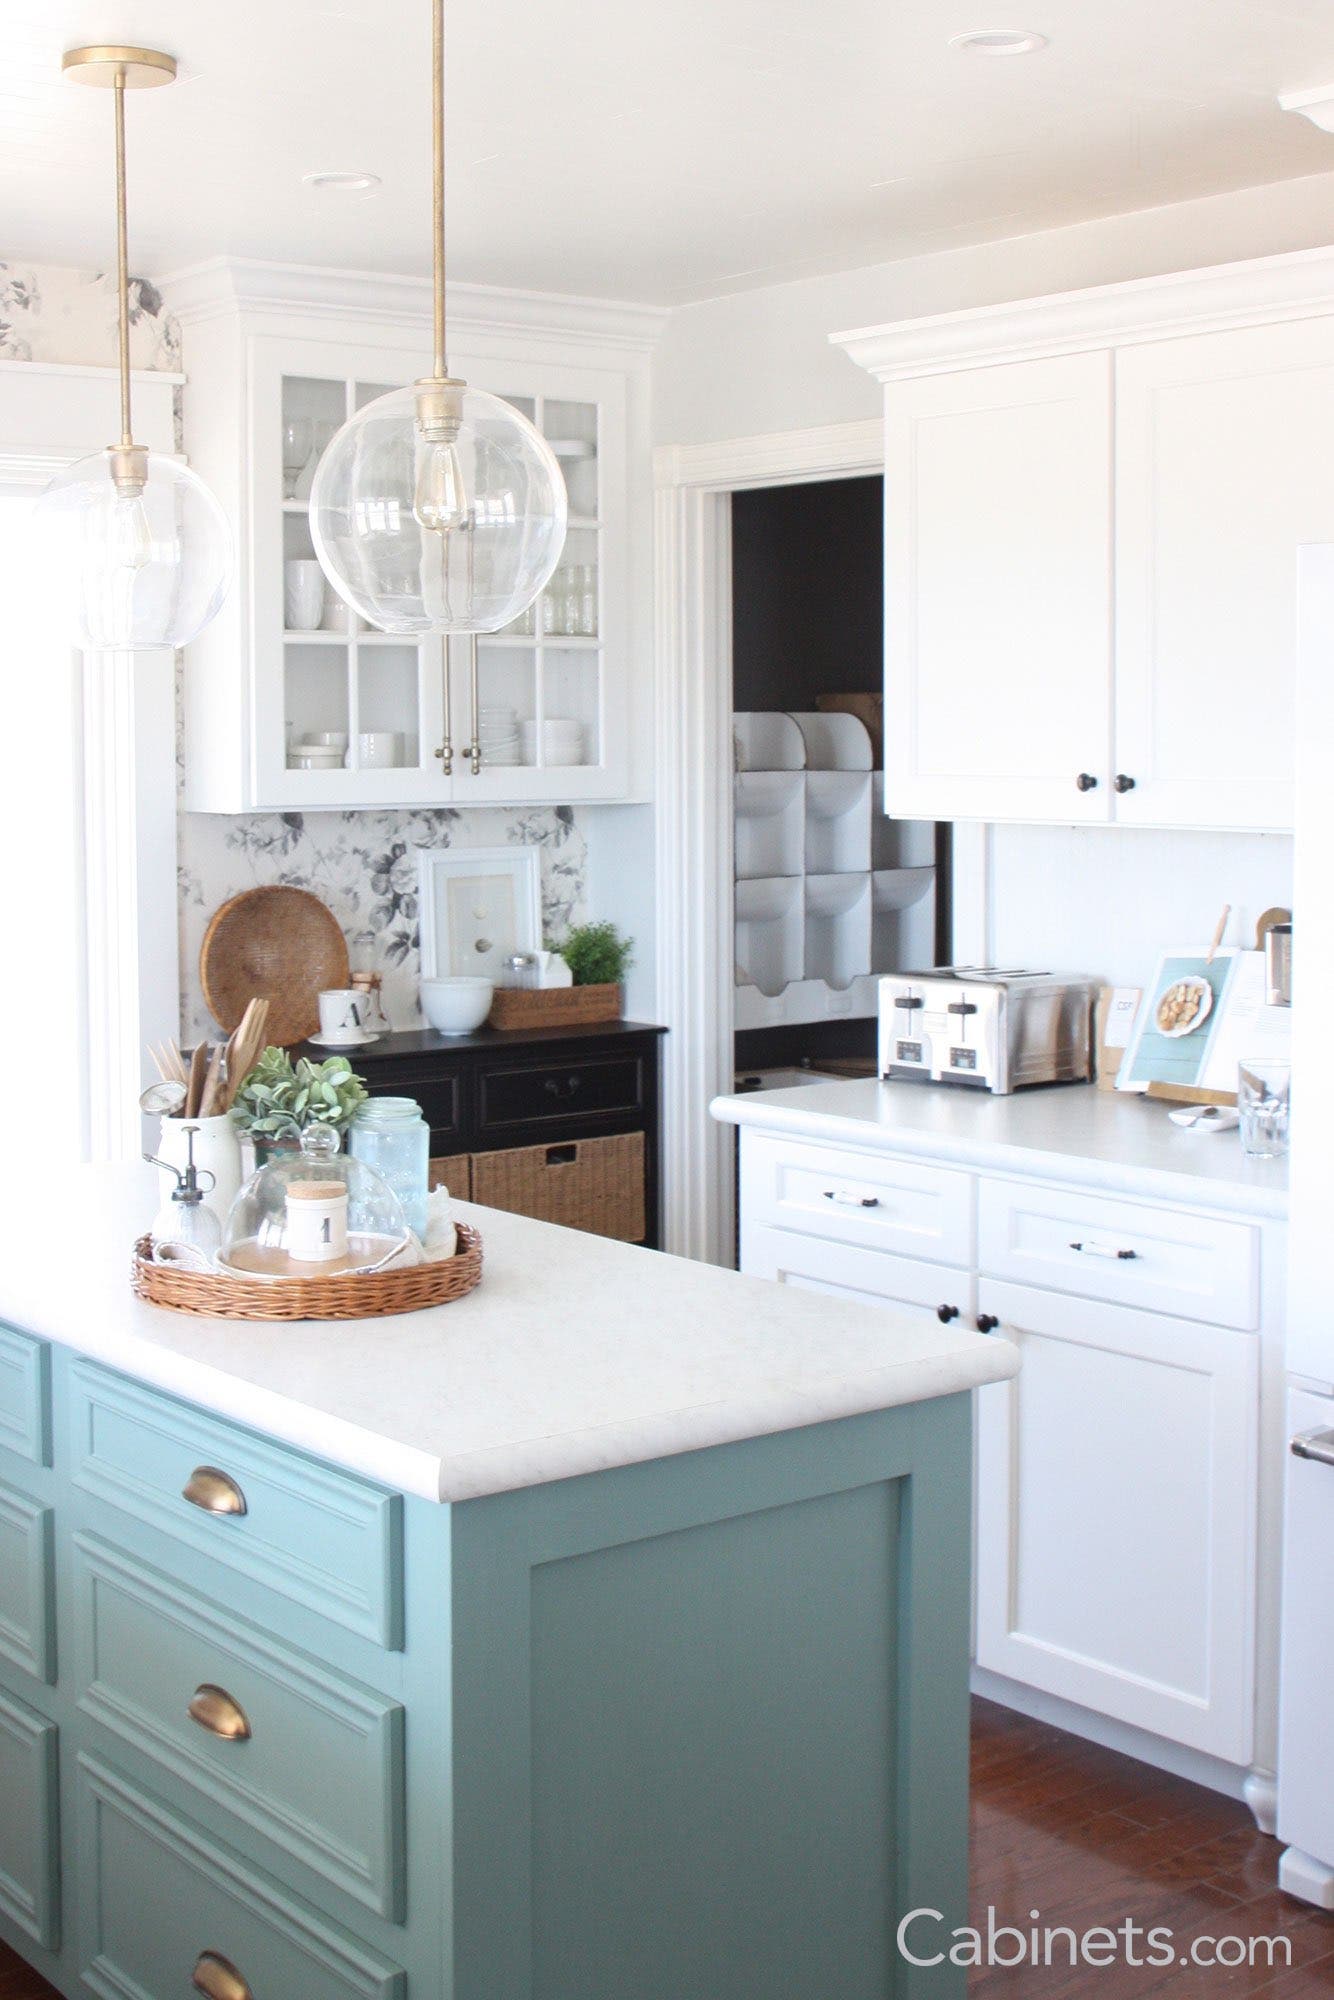 Sebring Maple Bright White kitchen with contrasting island